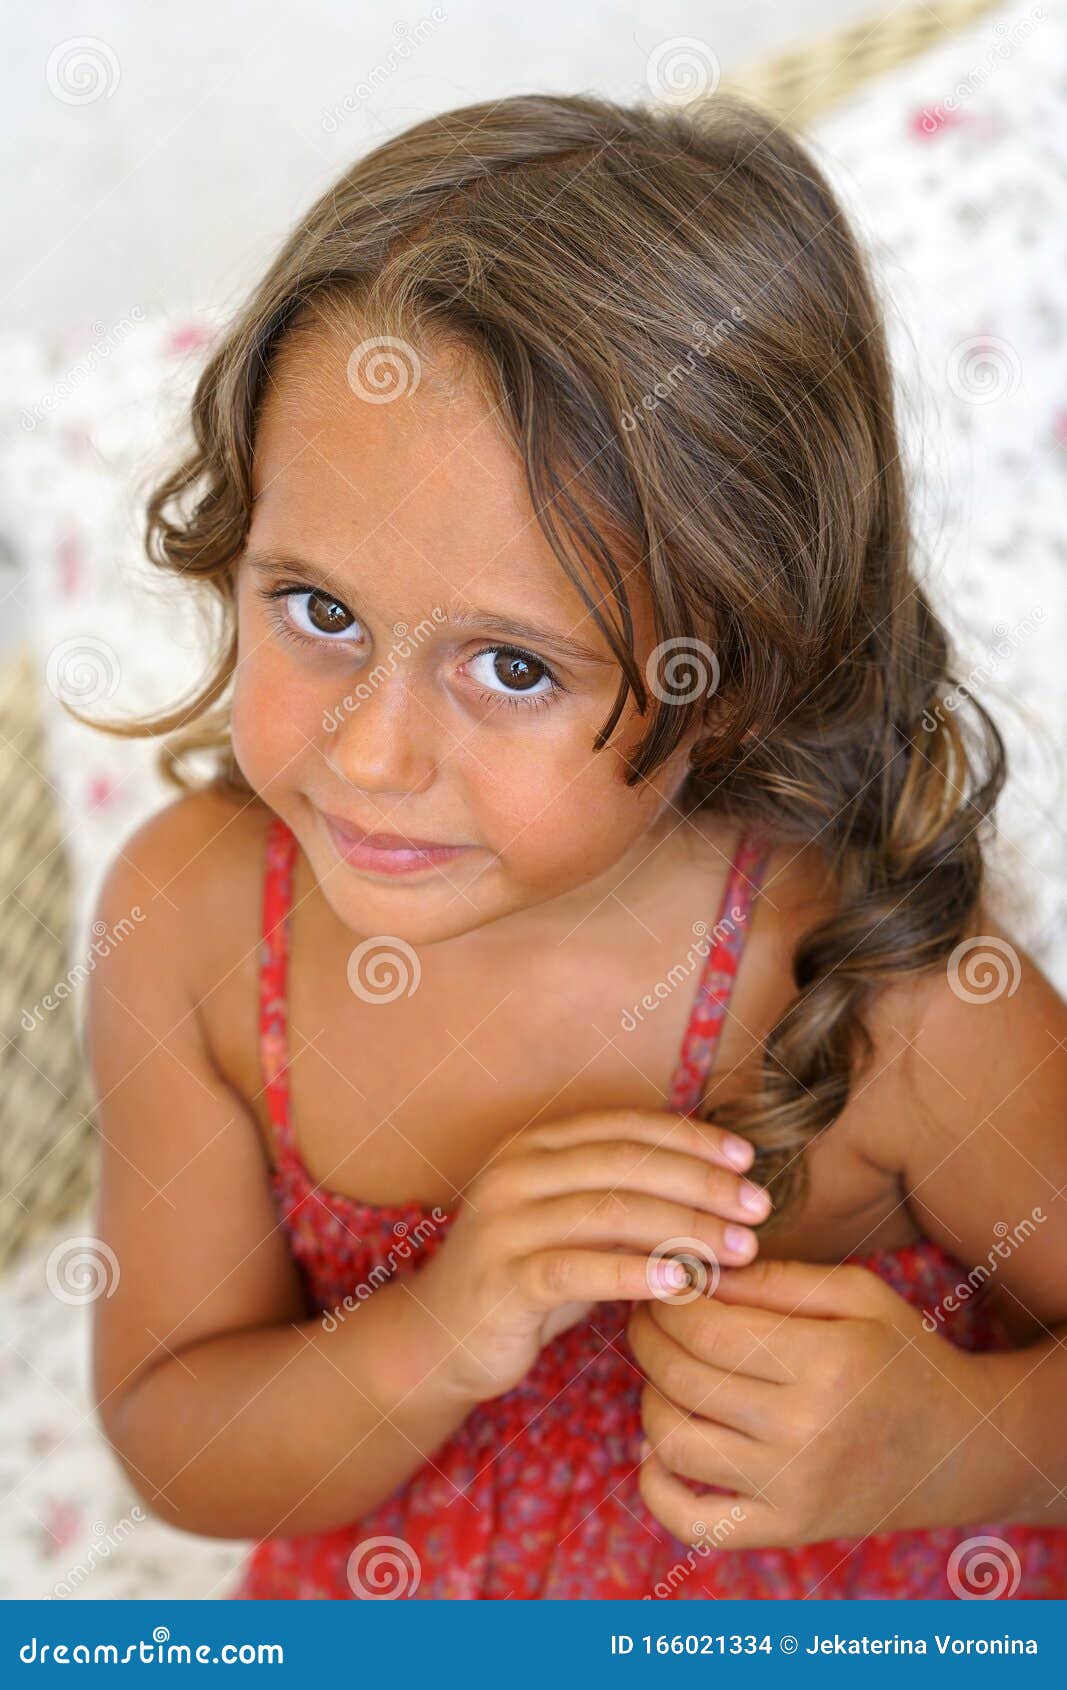 Cute little girl looking stock photo. Image of cute - 166021334